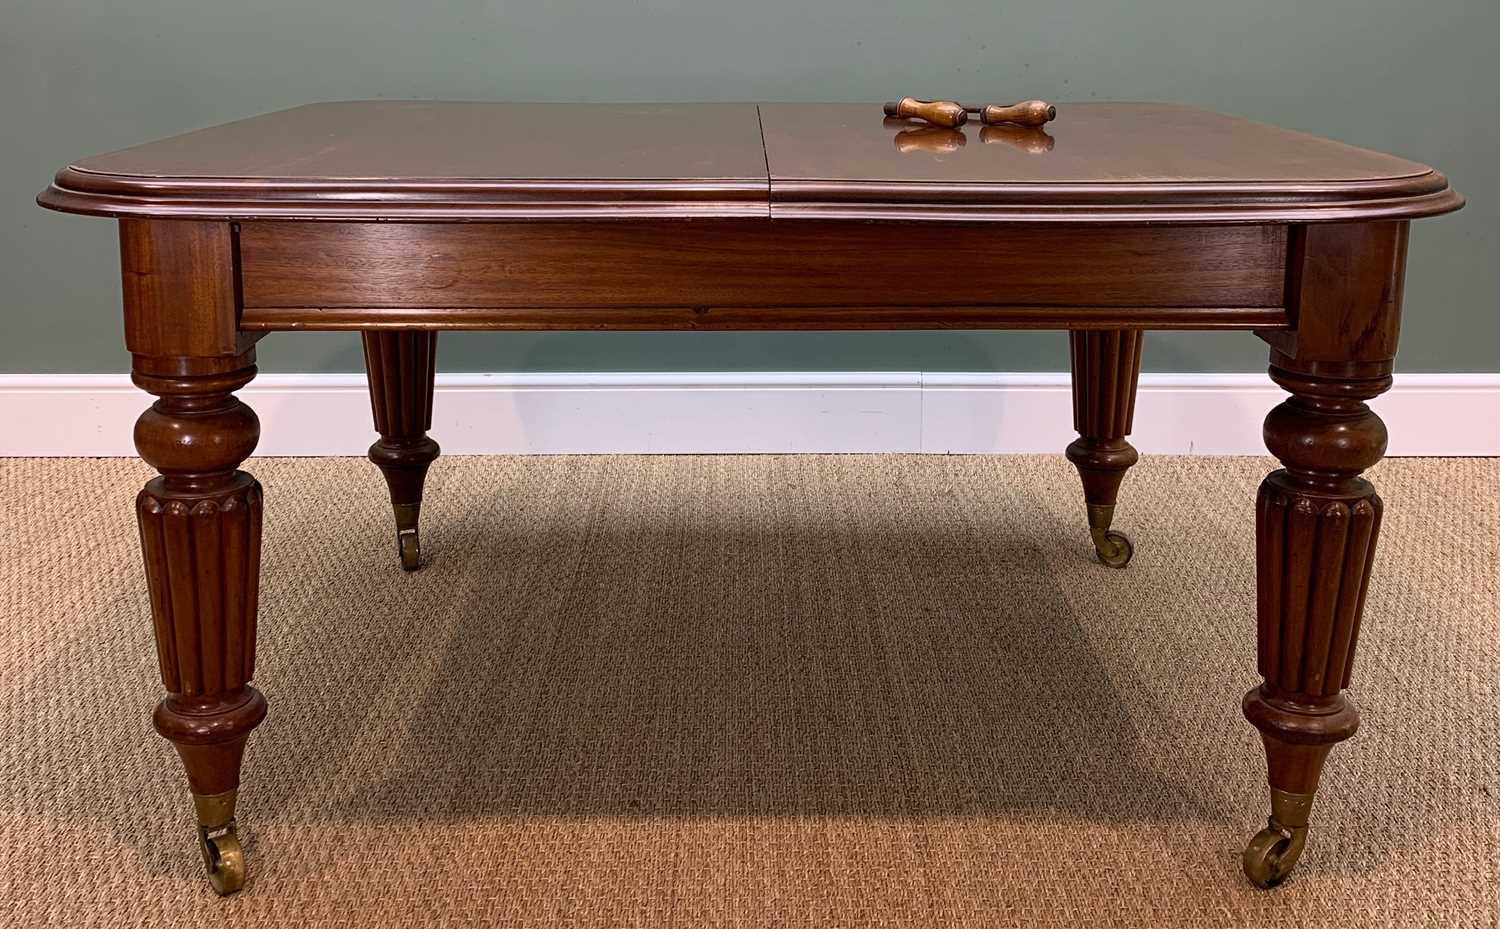 VICTORIAN STYLE MAHOGANY EXTENDING DINING TABLE, with three extra leaves, tapering reeded legs, - Image 2 of 4